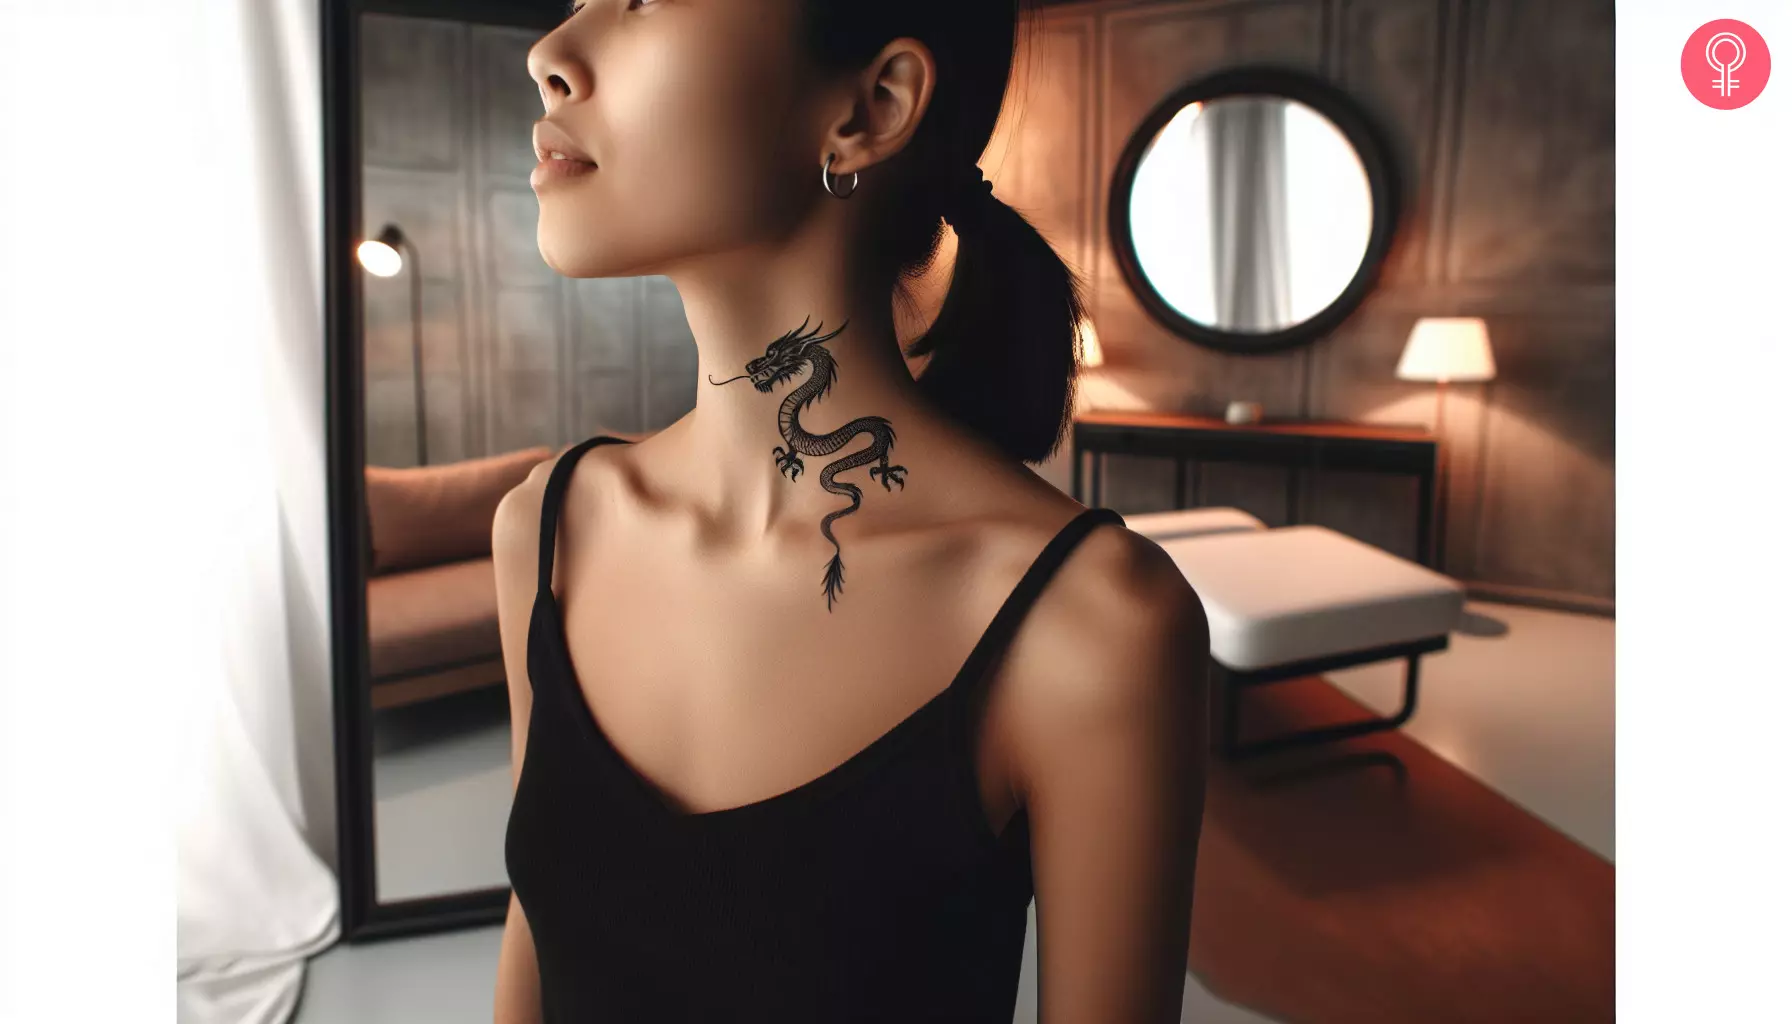 A small black dragon tattoo on the side of the neck